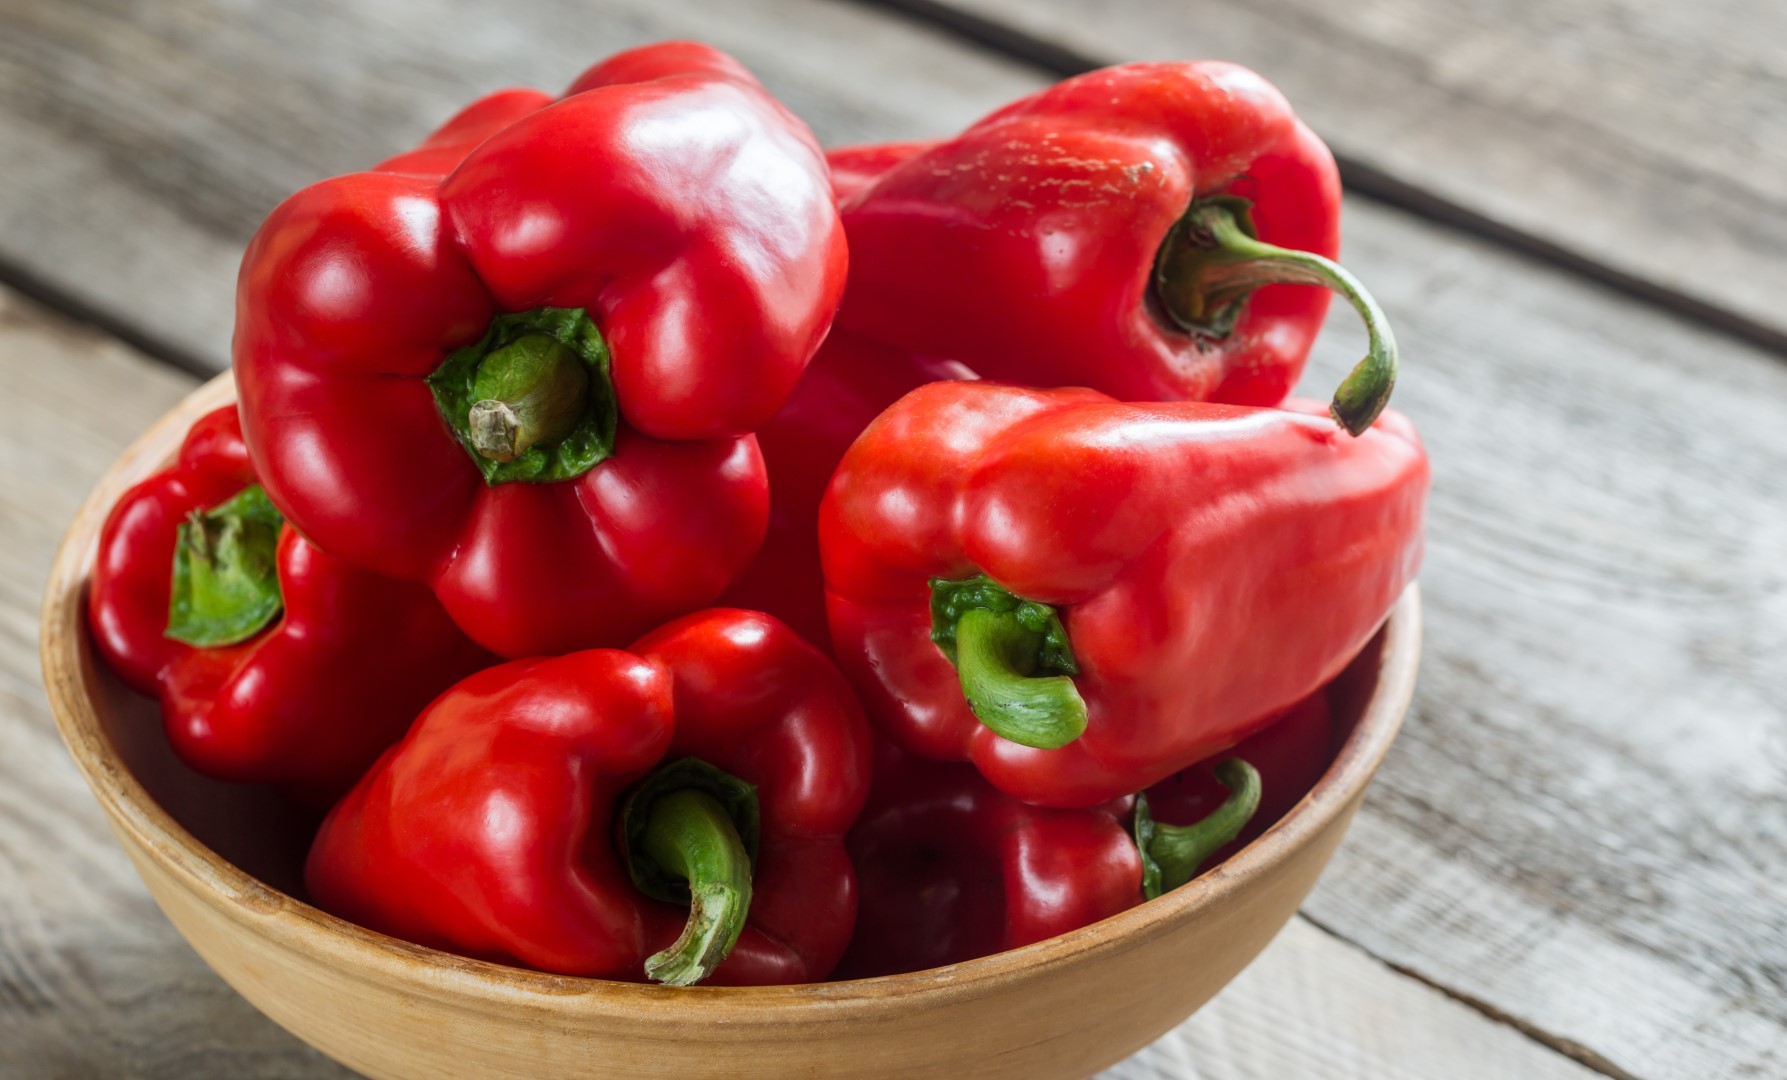 A bowl of red bell peppers